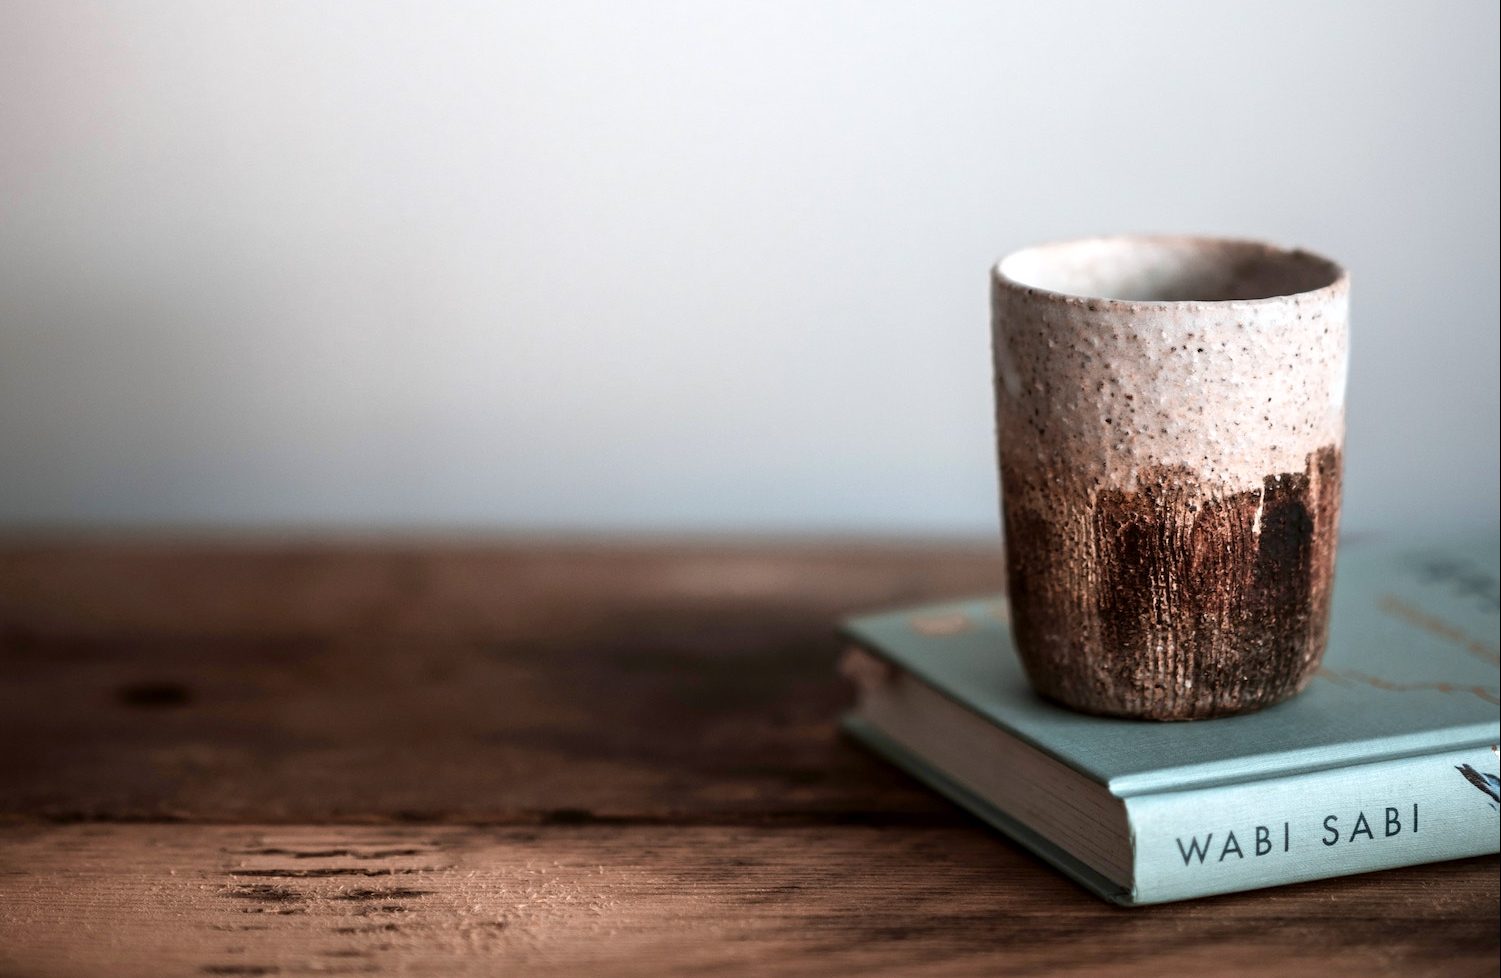 Wabi-Sabi: the Japanese philosophy of finding beauty in imperfections